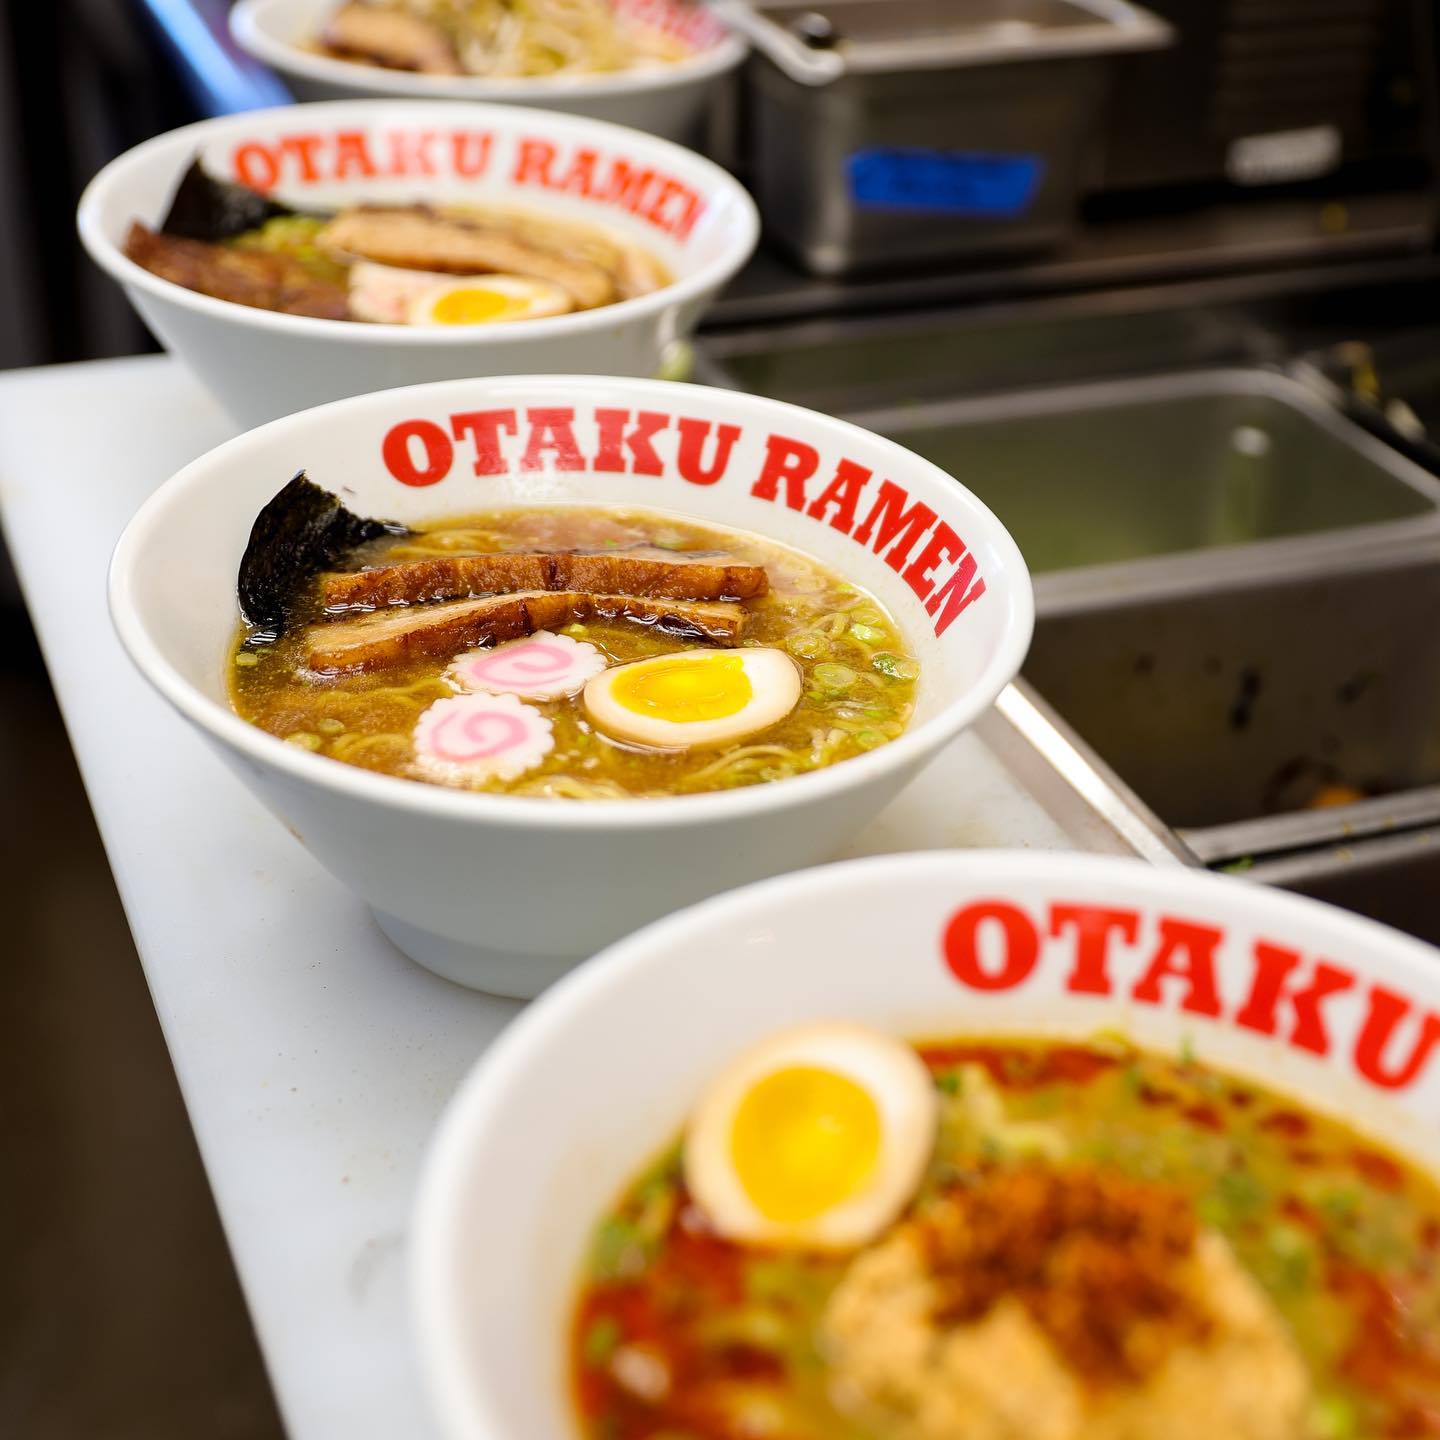 Three bowls of ramen lined up in a row. The white bowls are emblazoned with the Otaku Ramen logo in red